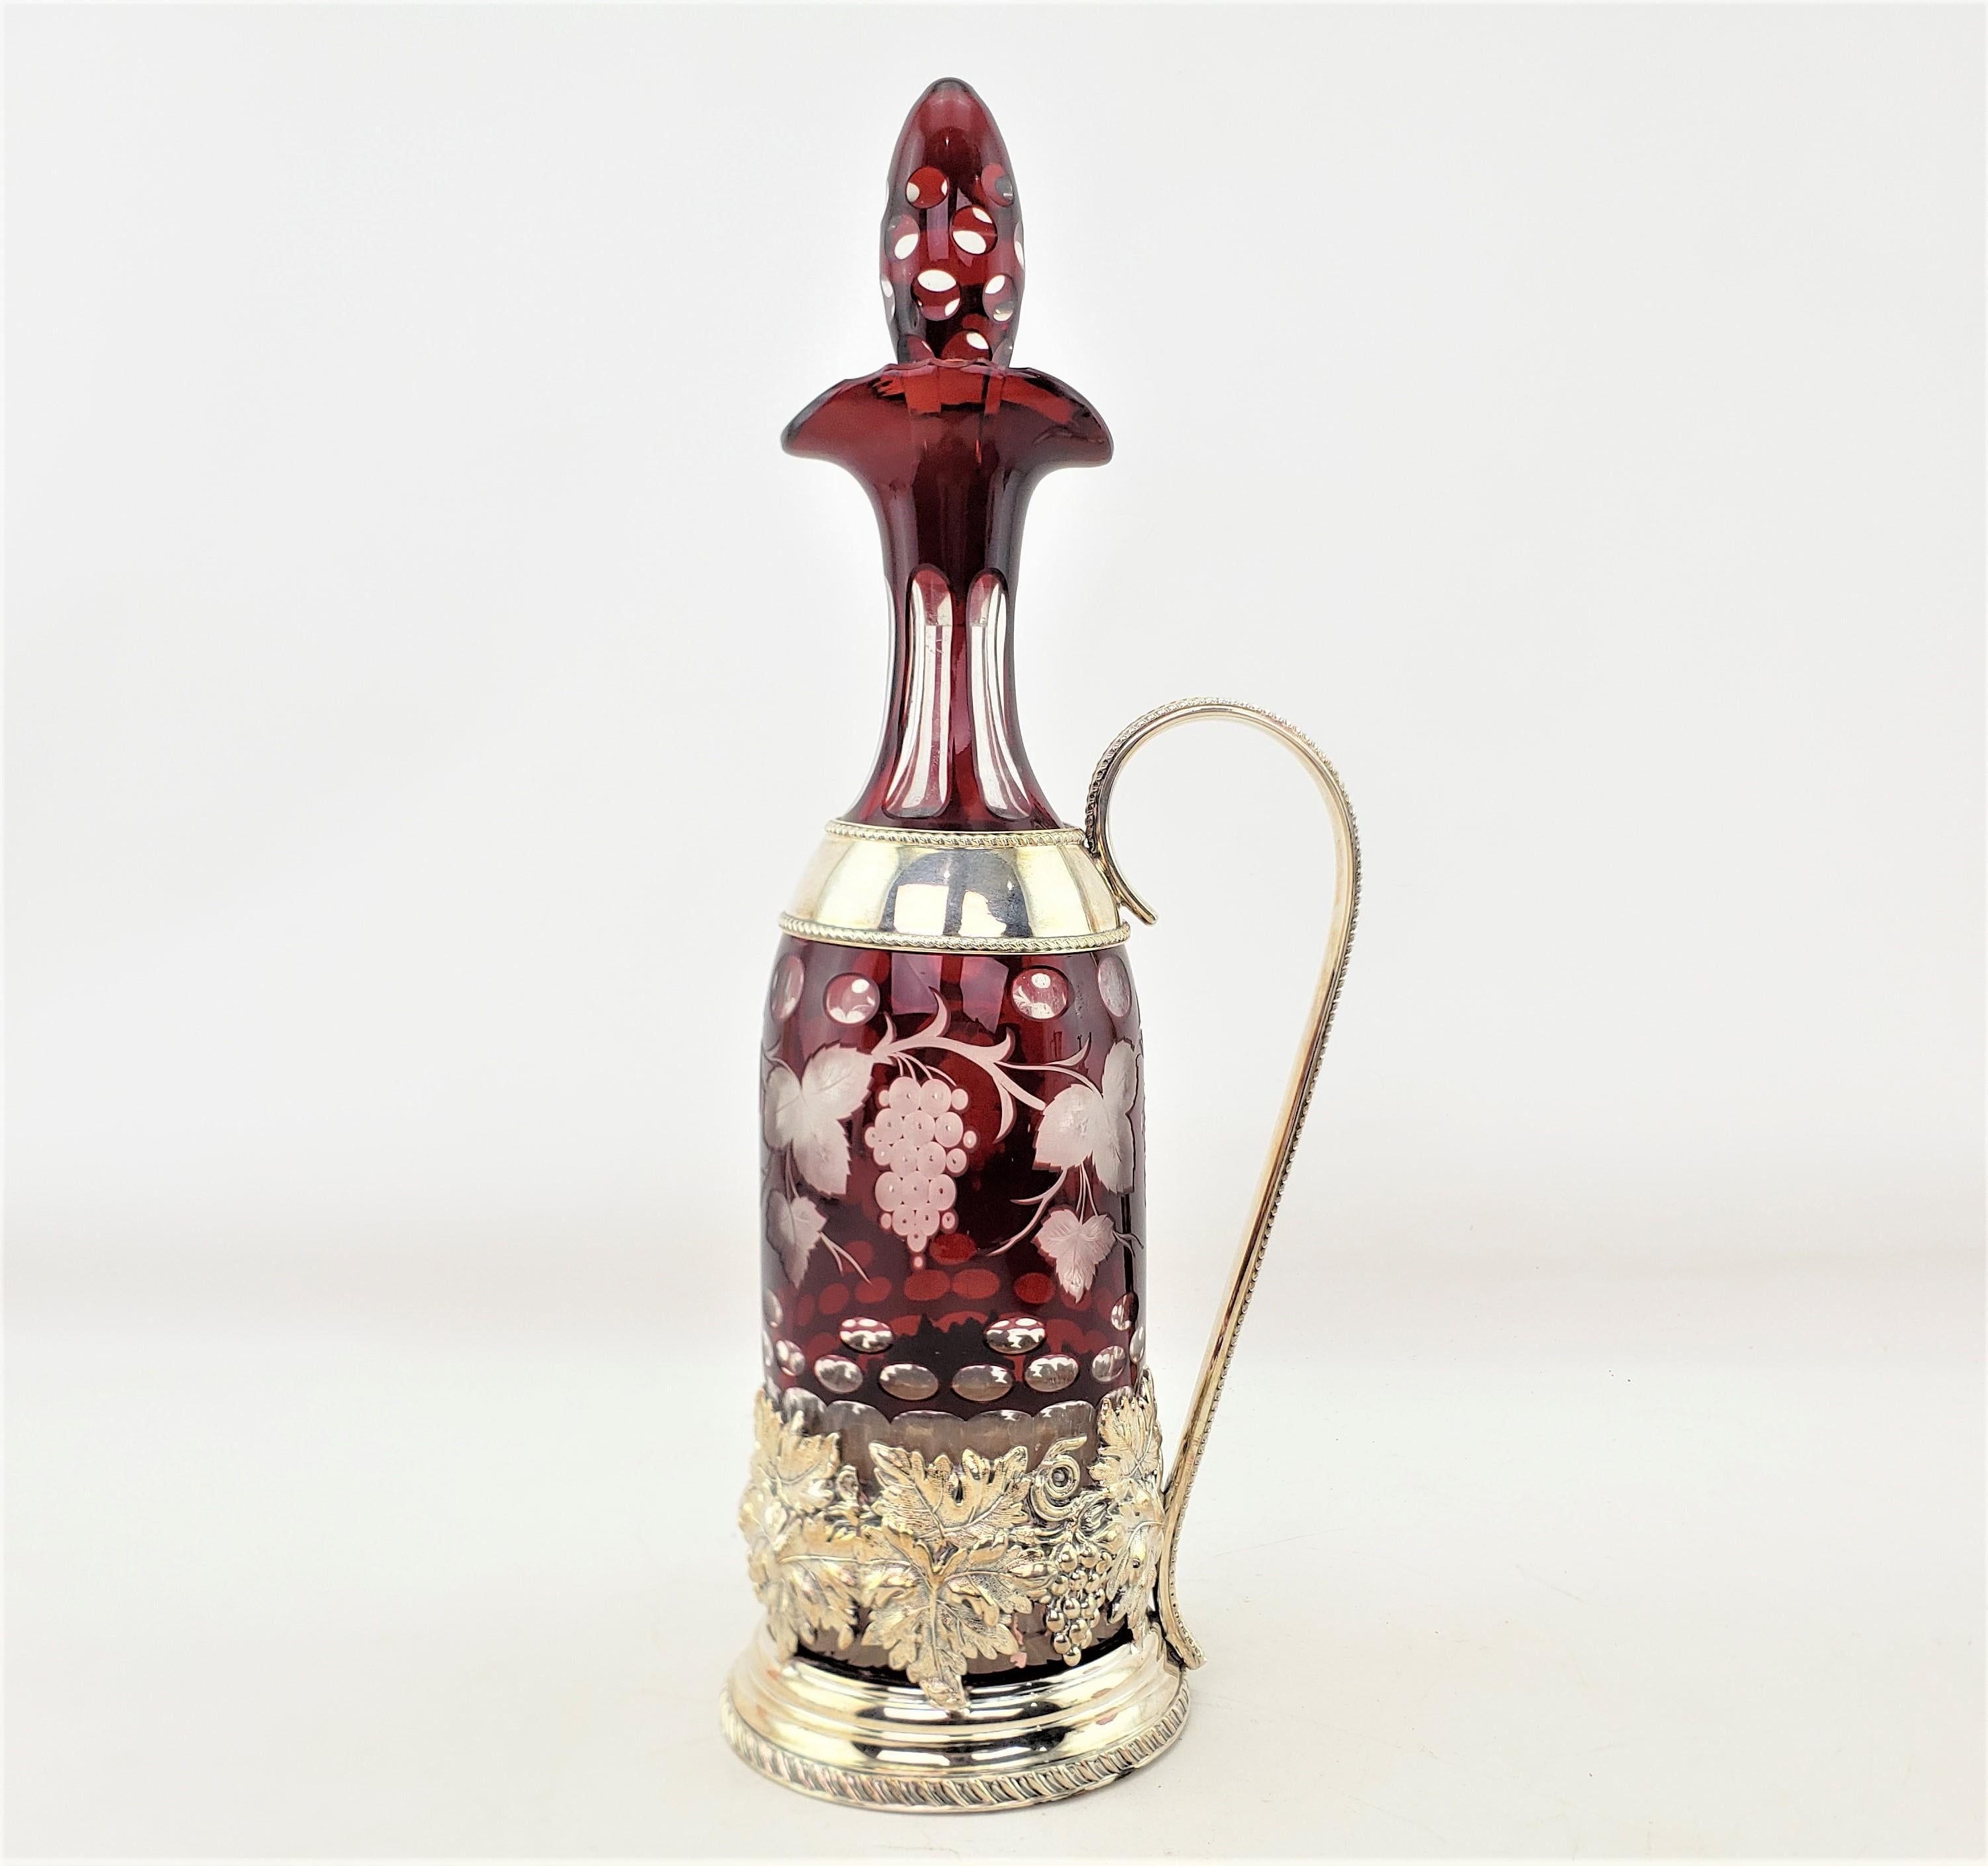 This antique decanter stand is signed by an unknown maker, but believed to have originated from the United States and date to approxiately 1900. The decanter bottle is presumed to have originated from Bohemia, now the Czech Republic and dating to